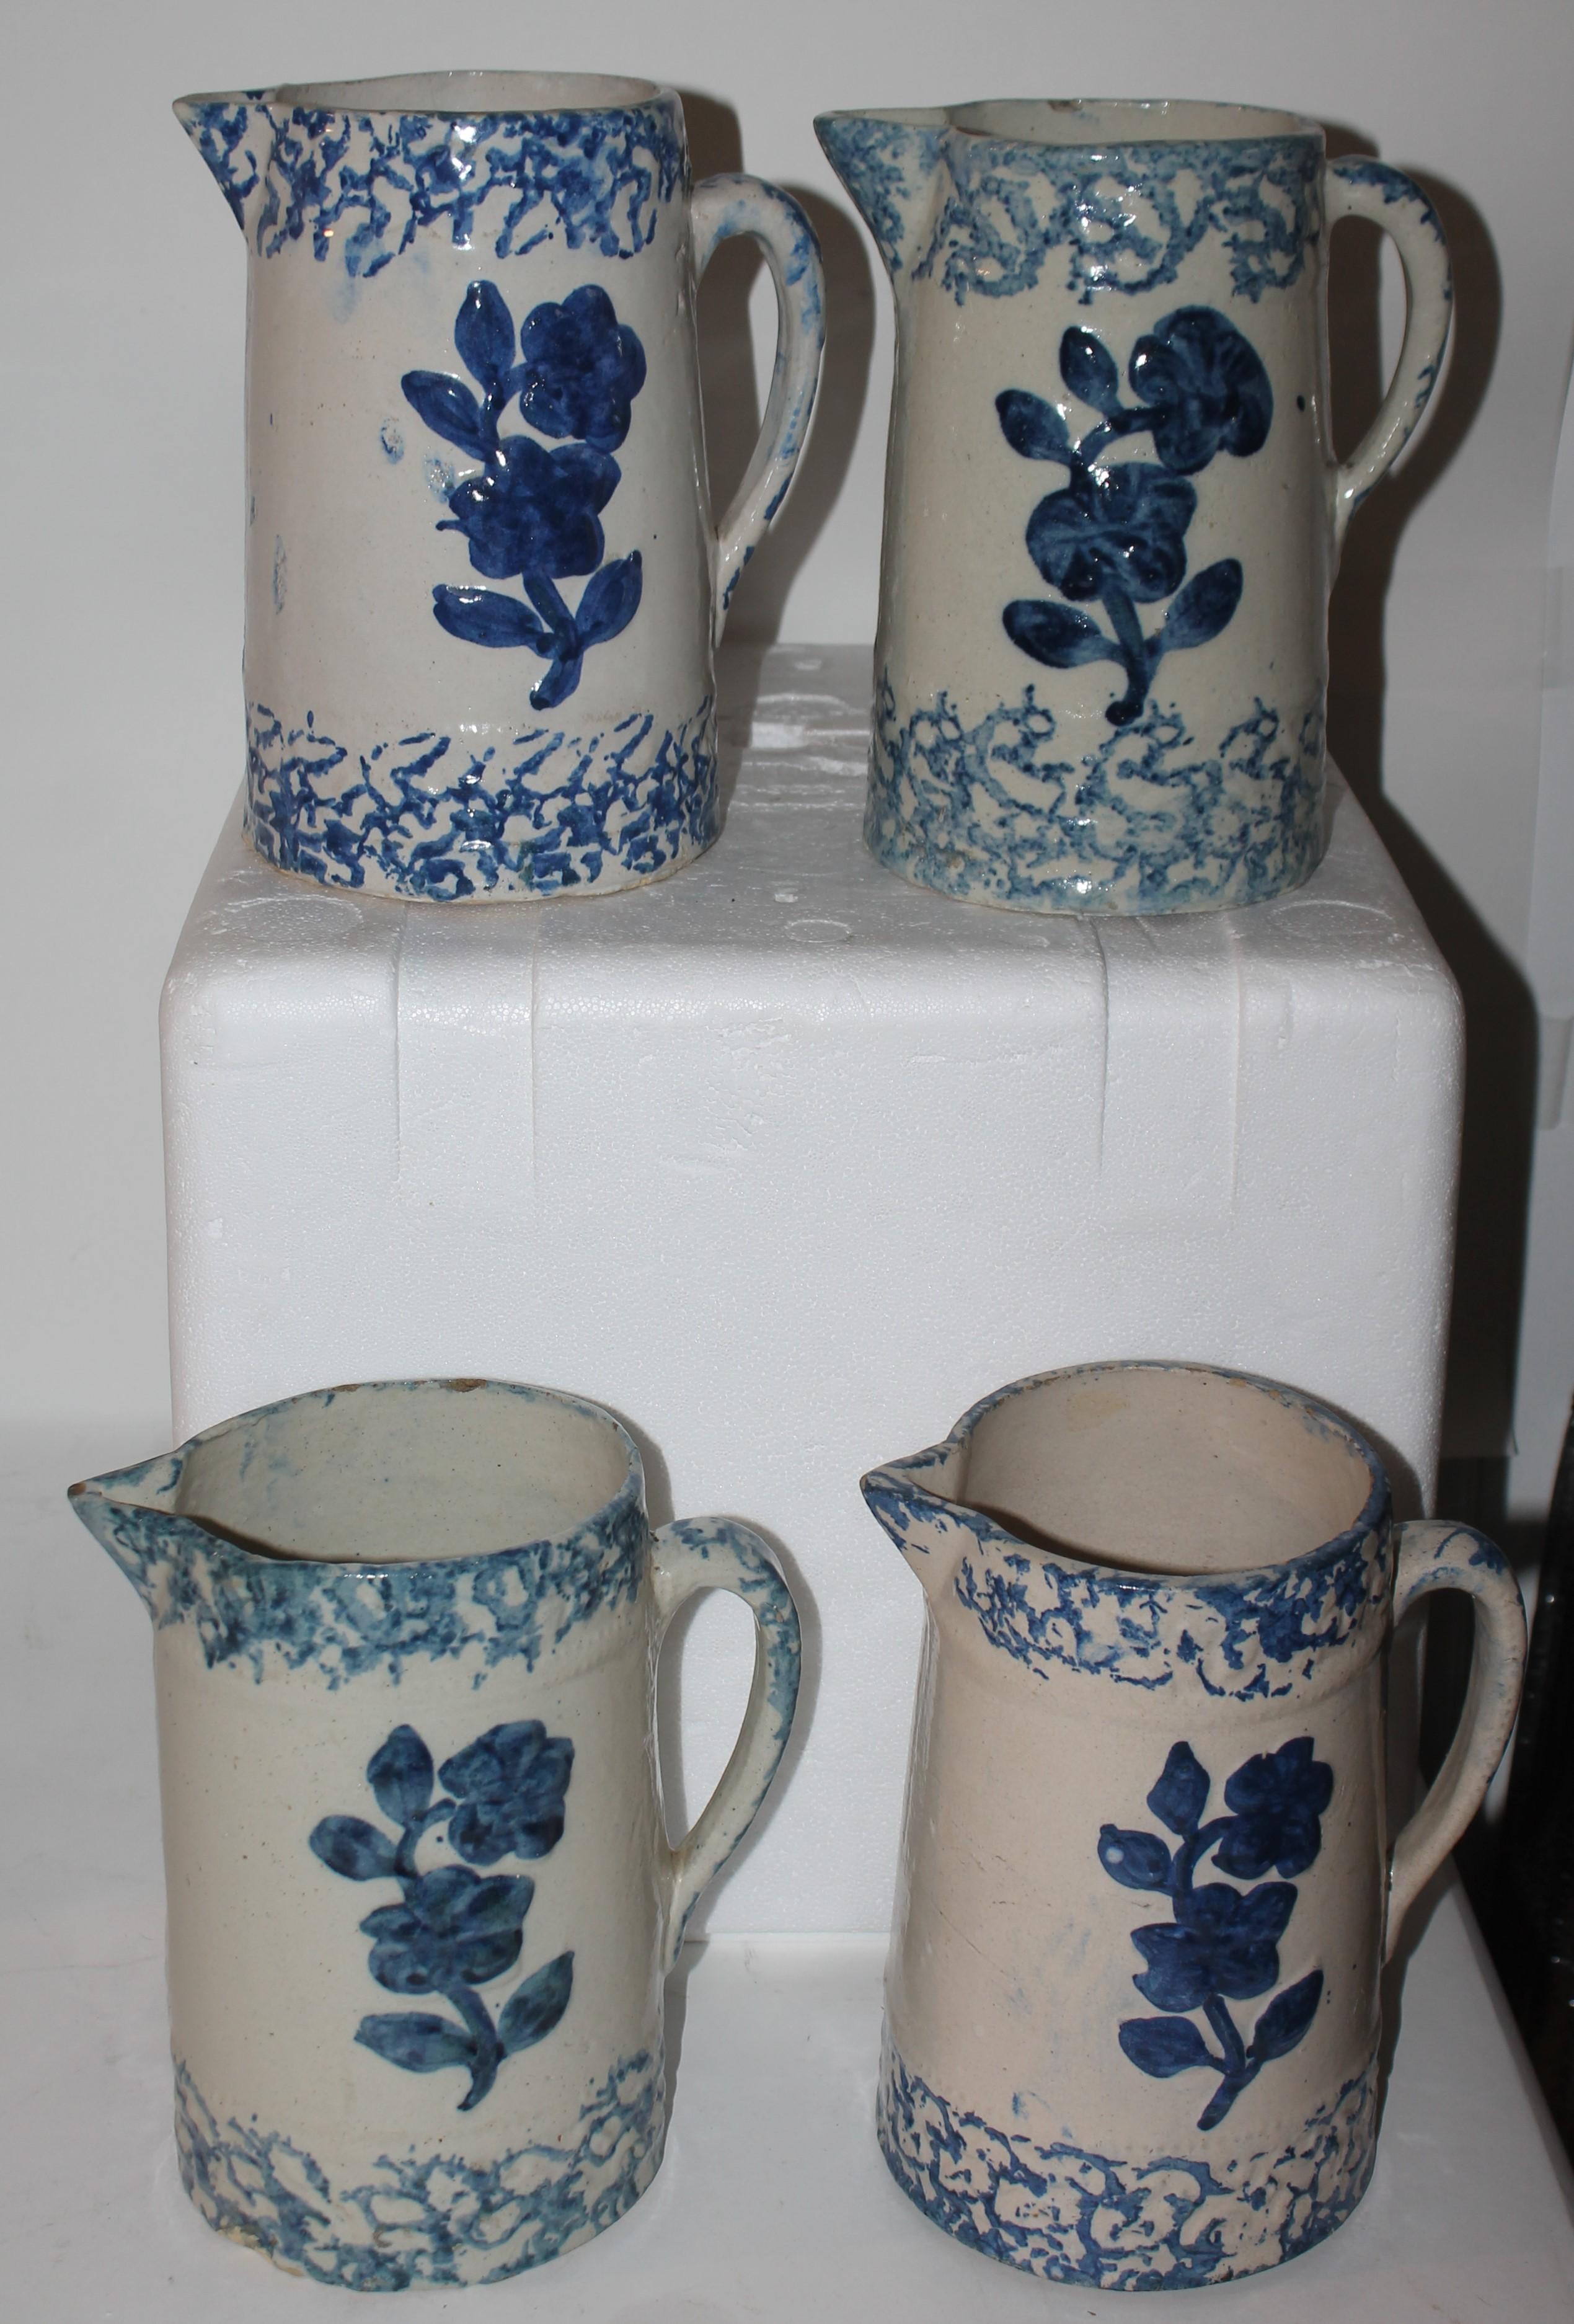 These 19th century handmade and painted floral faced sponge ware pottery pitchers are in fine condition. Each pitcher measures 7 x 5 x 9. Sold as a group of four.